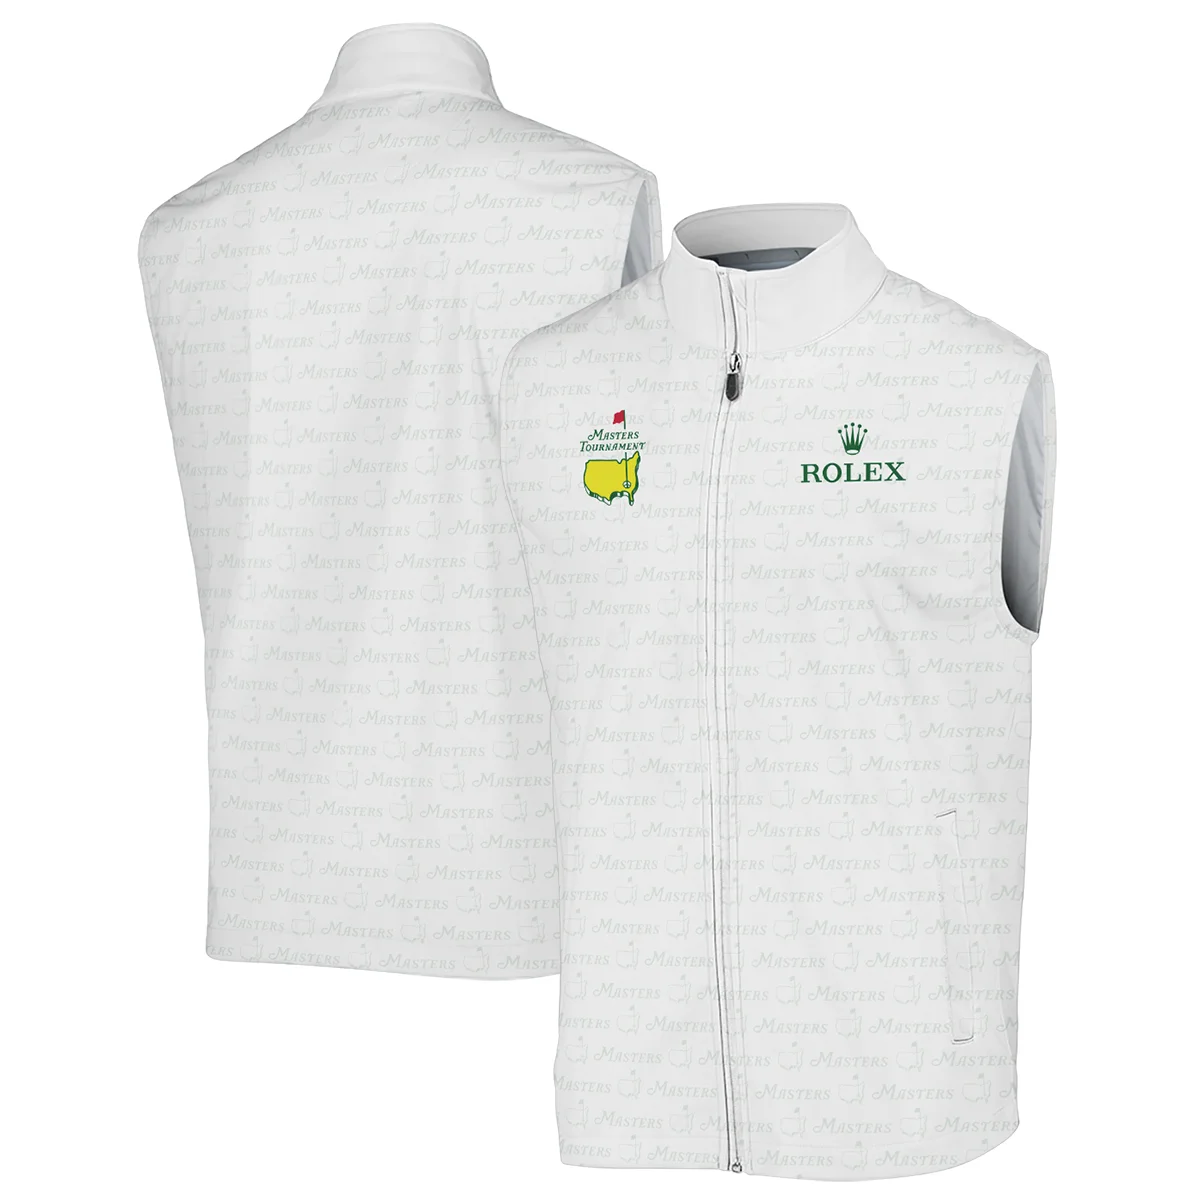 Golf Pattern Cup White Mix Green Masters Tournament Rolex Bomber Jacket Style Classic Bomber Jacket